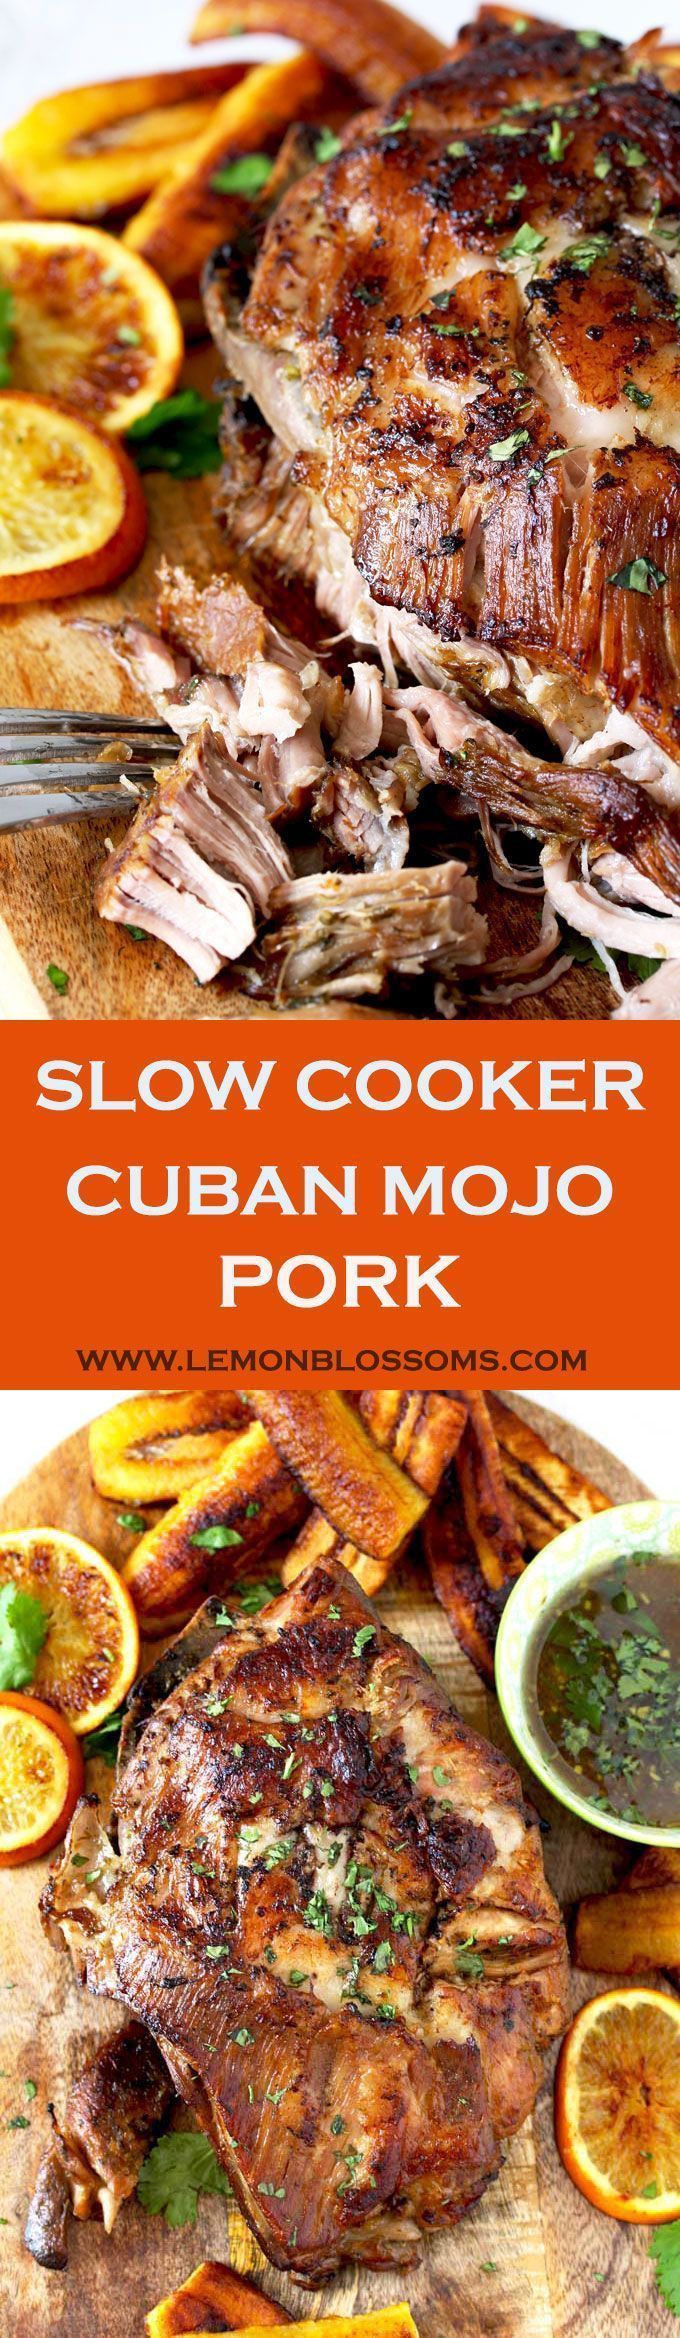 High Protein Low Carb Slow Cooker Recipes
 Slow Cooker Cuban Mojo Pork